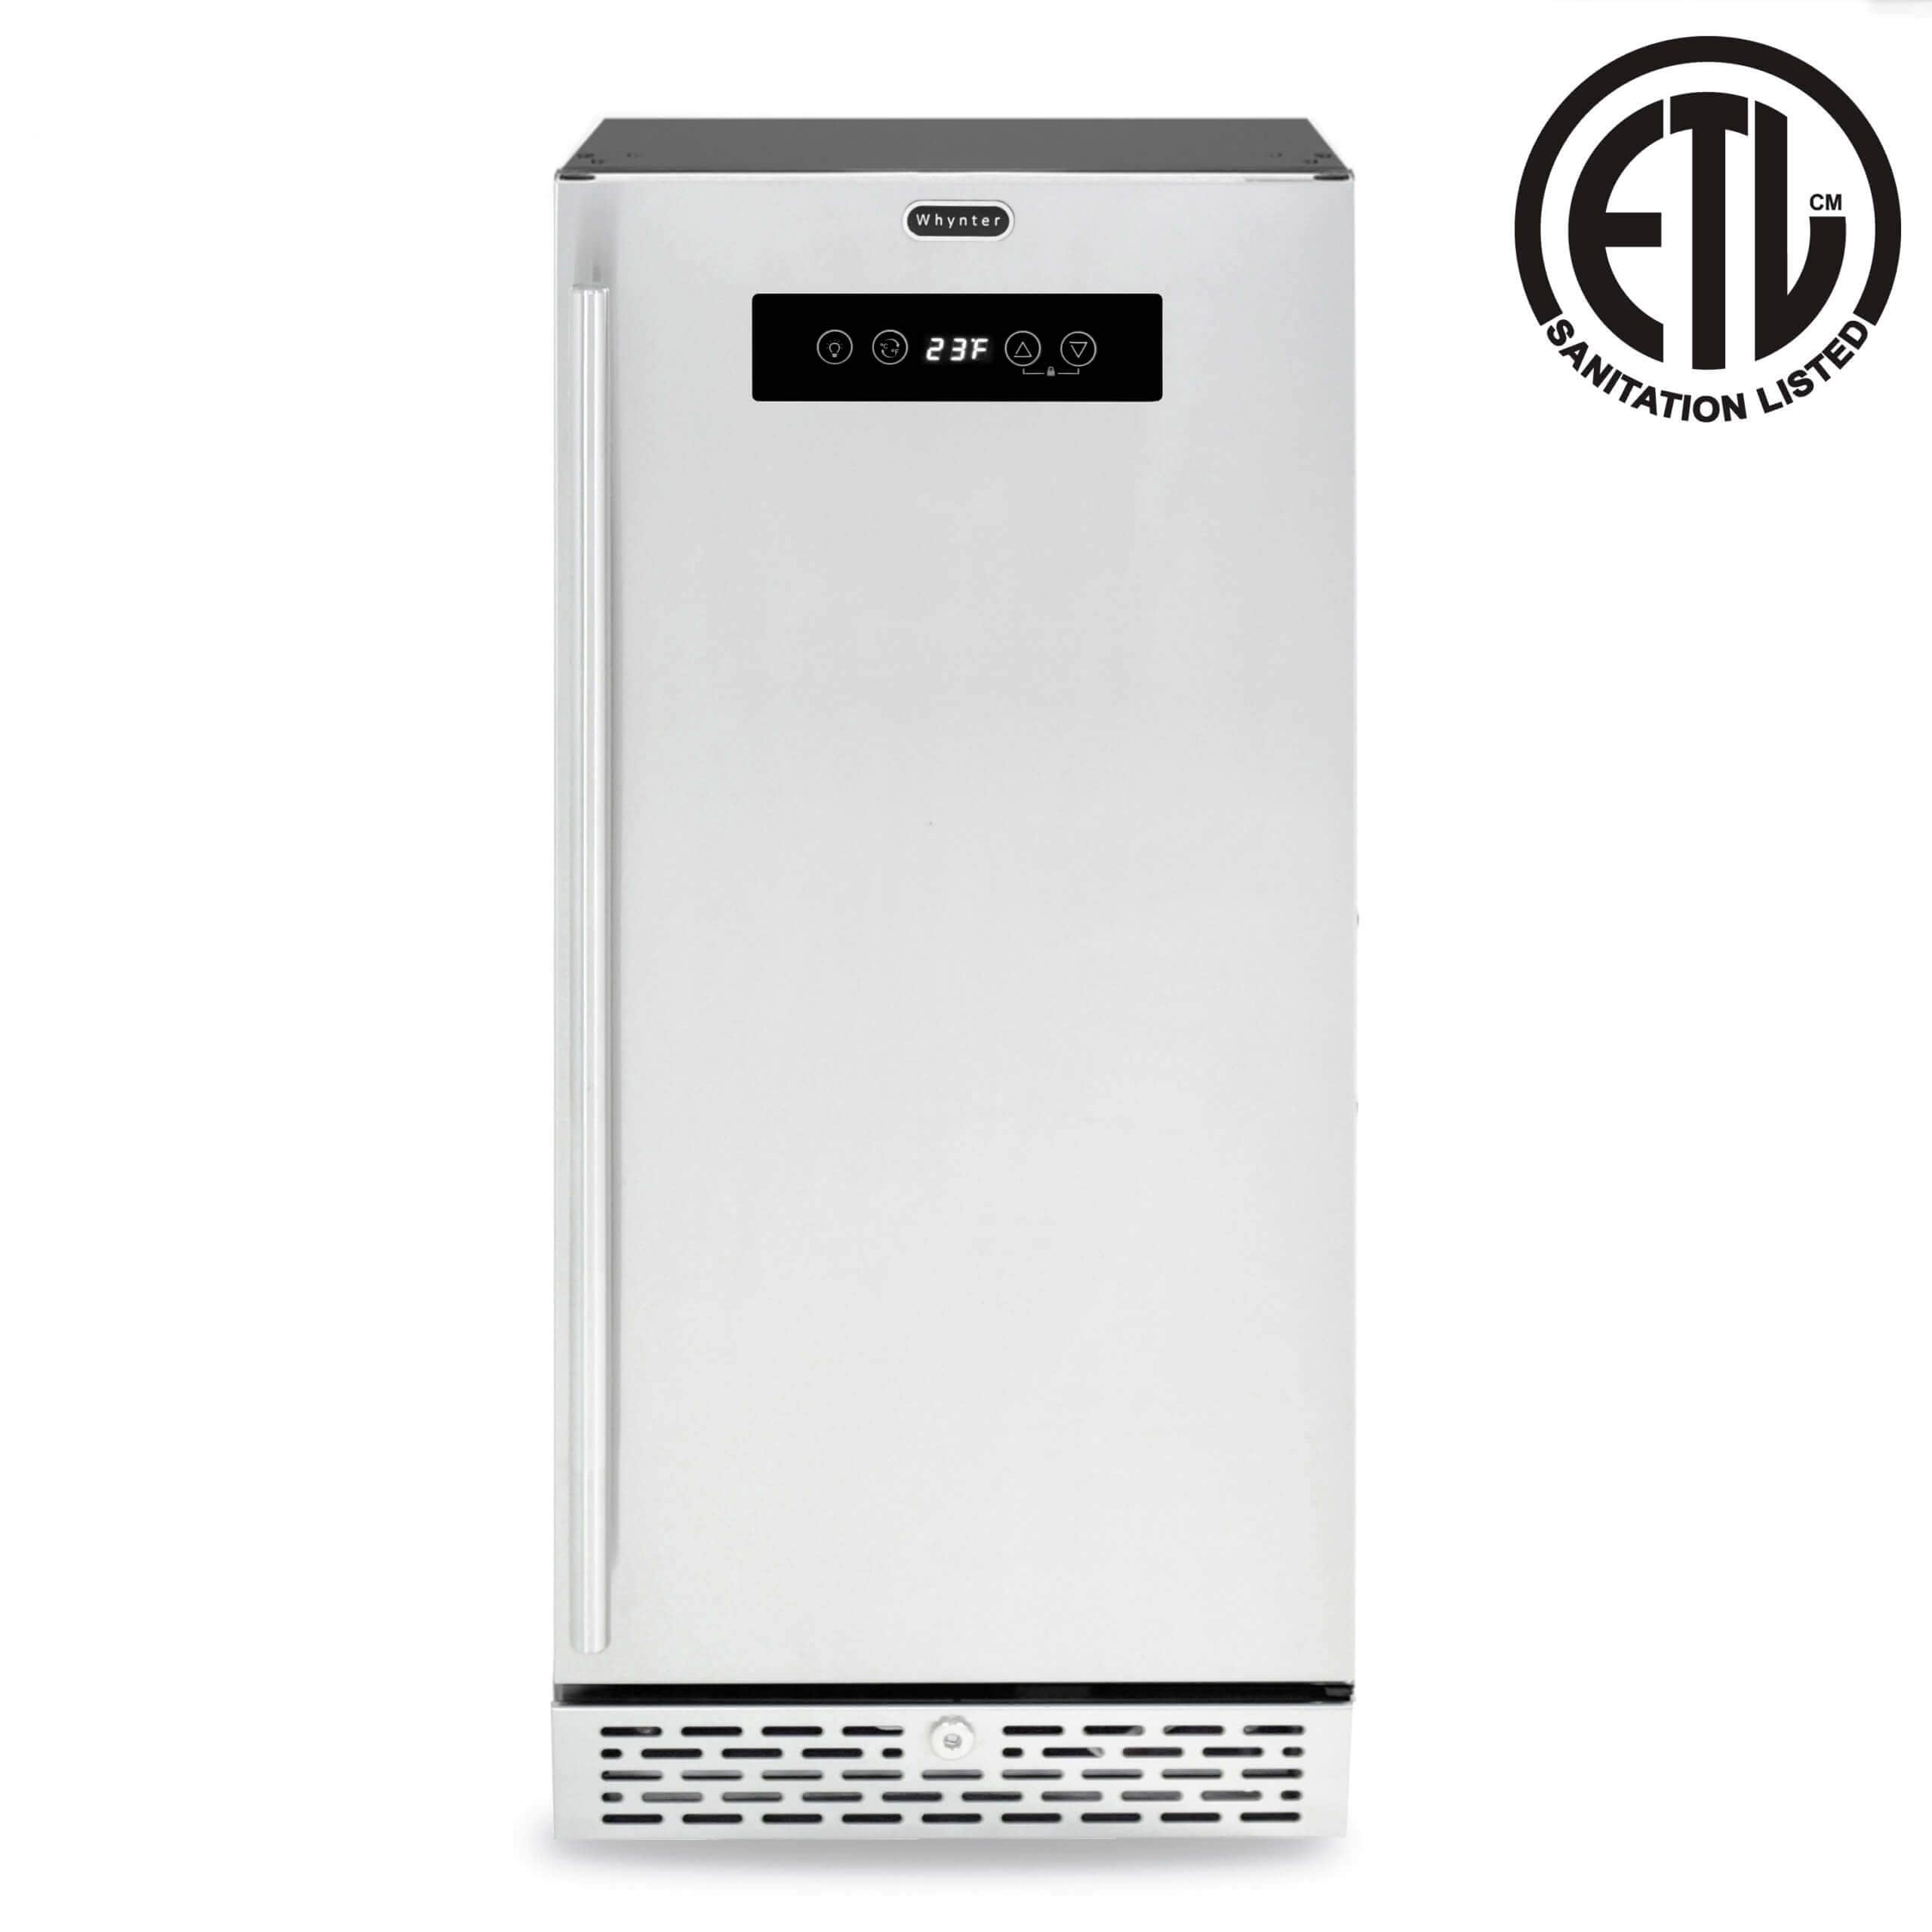 Whynter 2.9 cu. ft. Beer Keg Froster Beverage Refrigerator with Digital Controls BEF-286SB Wine Coolers Empire